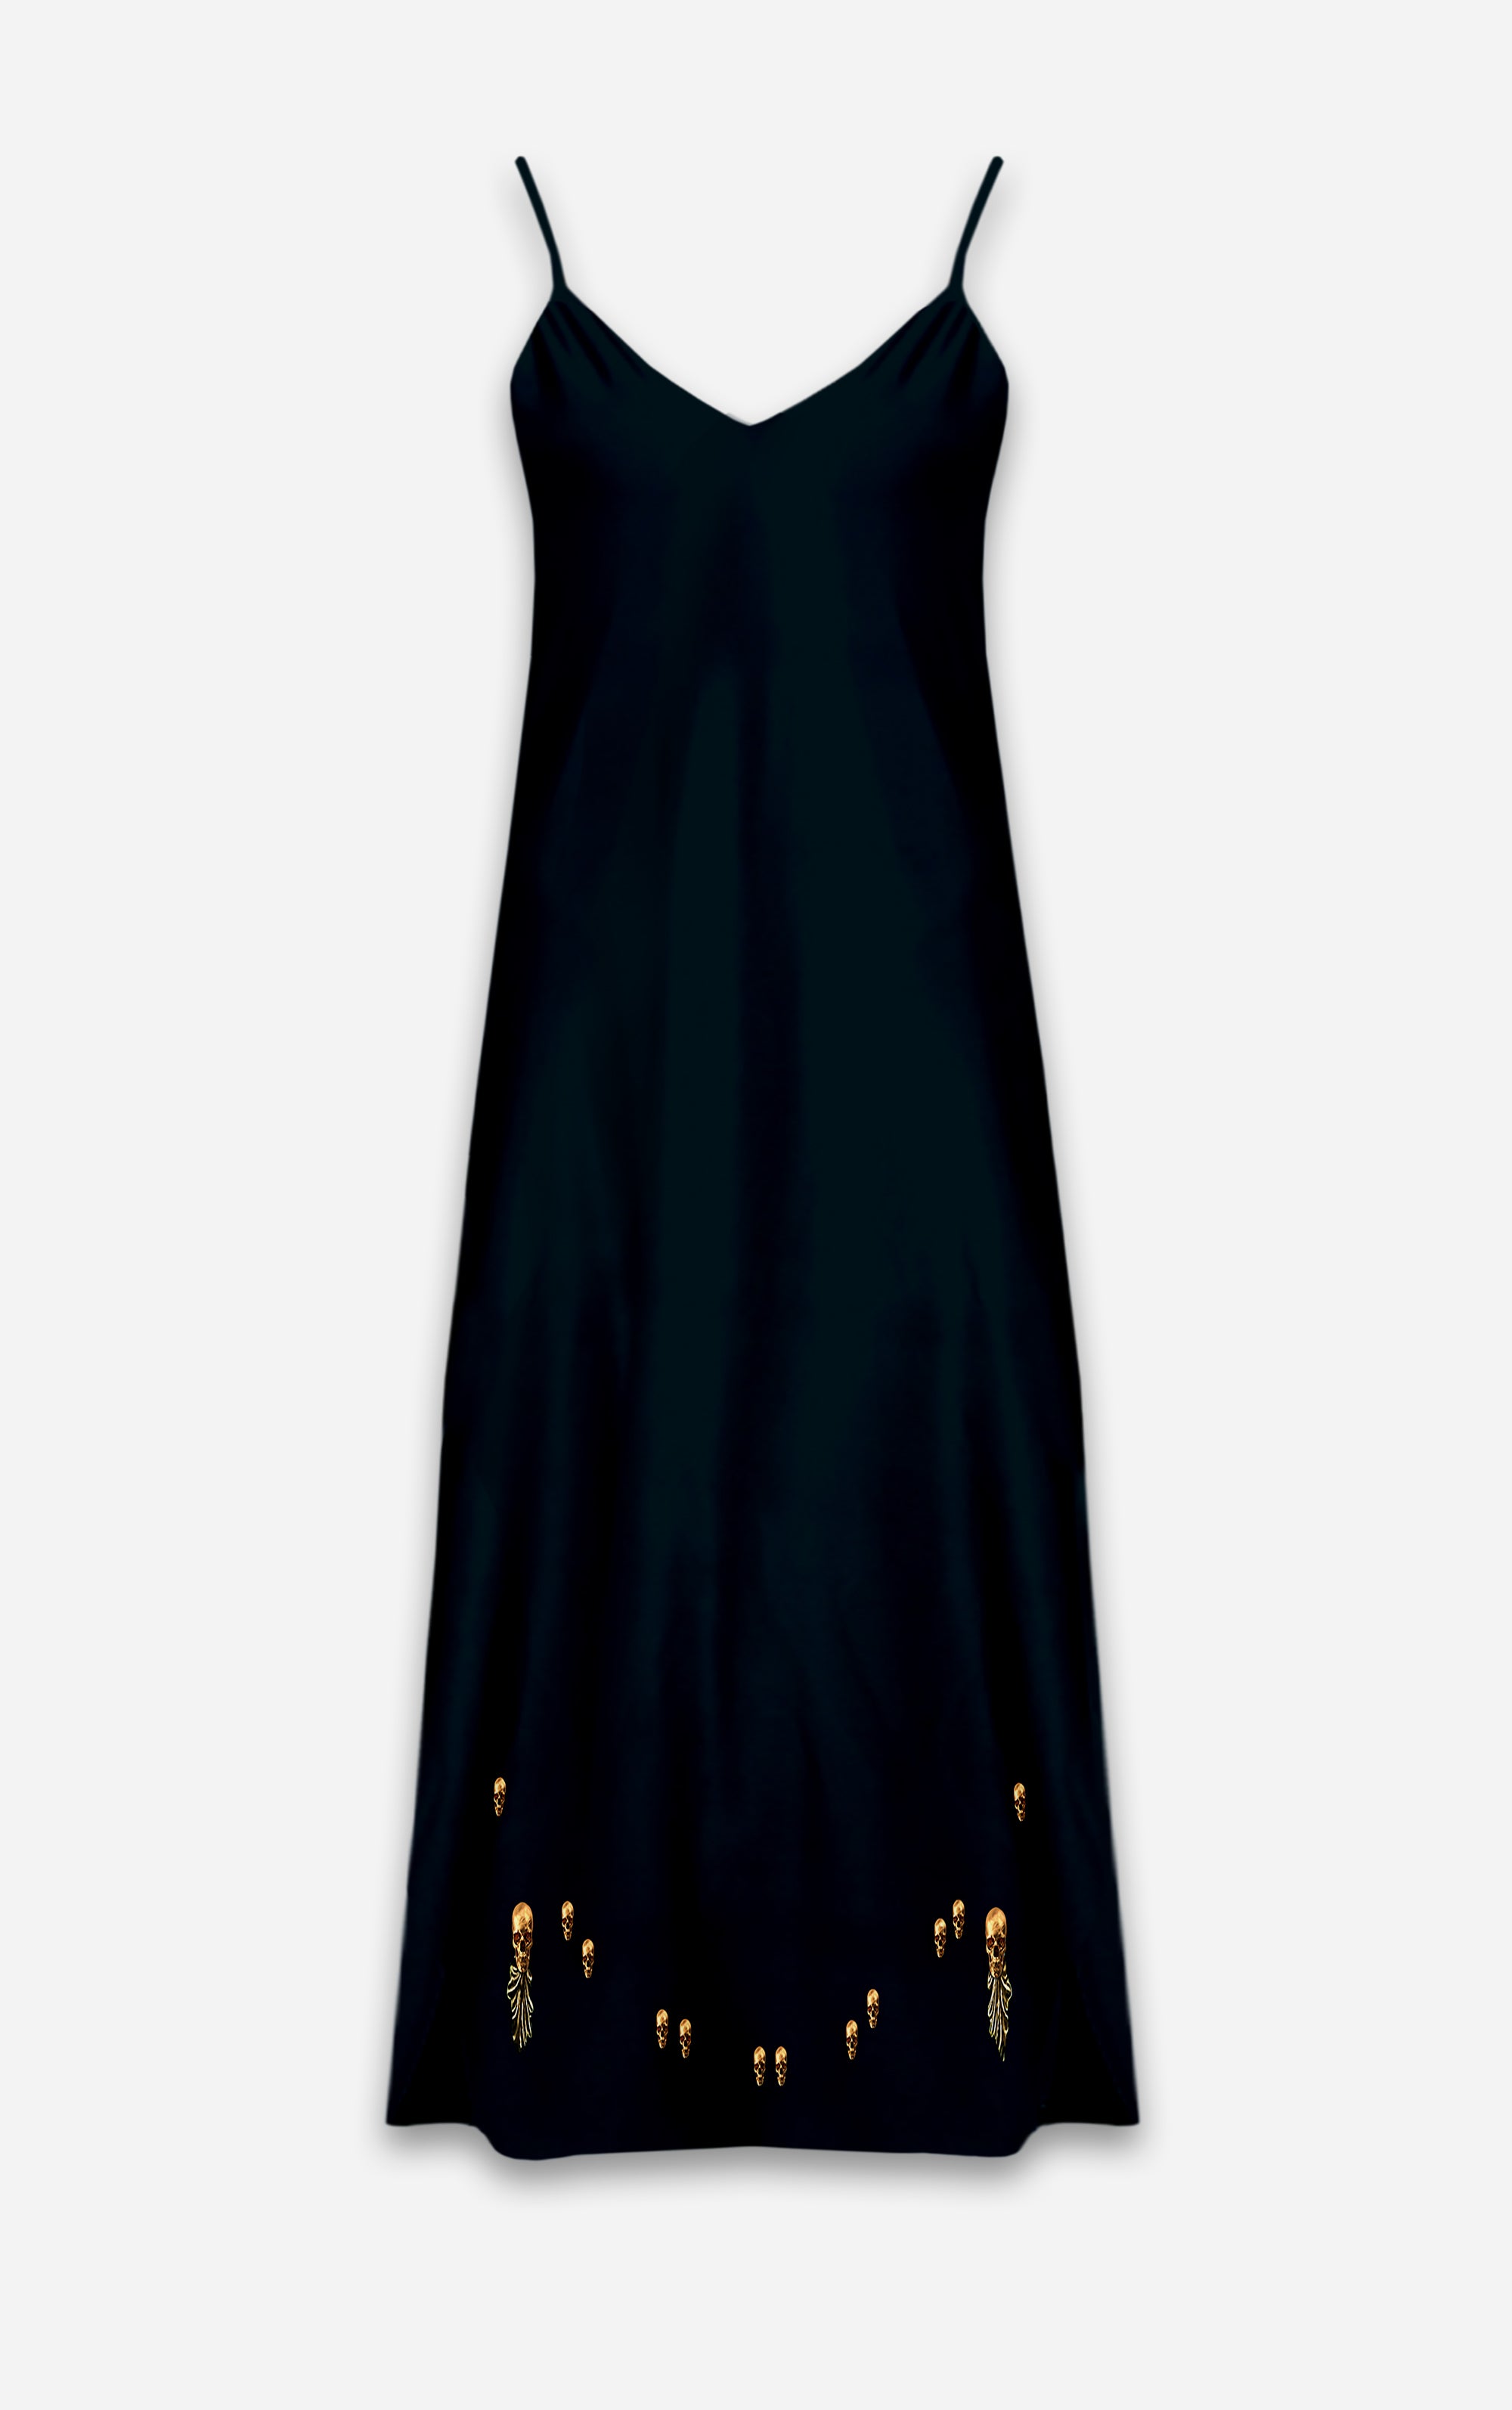 The Others- Baroque Skull- French Gothic V Neck Slip Dress in Midnight Teal | Le Leanian™